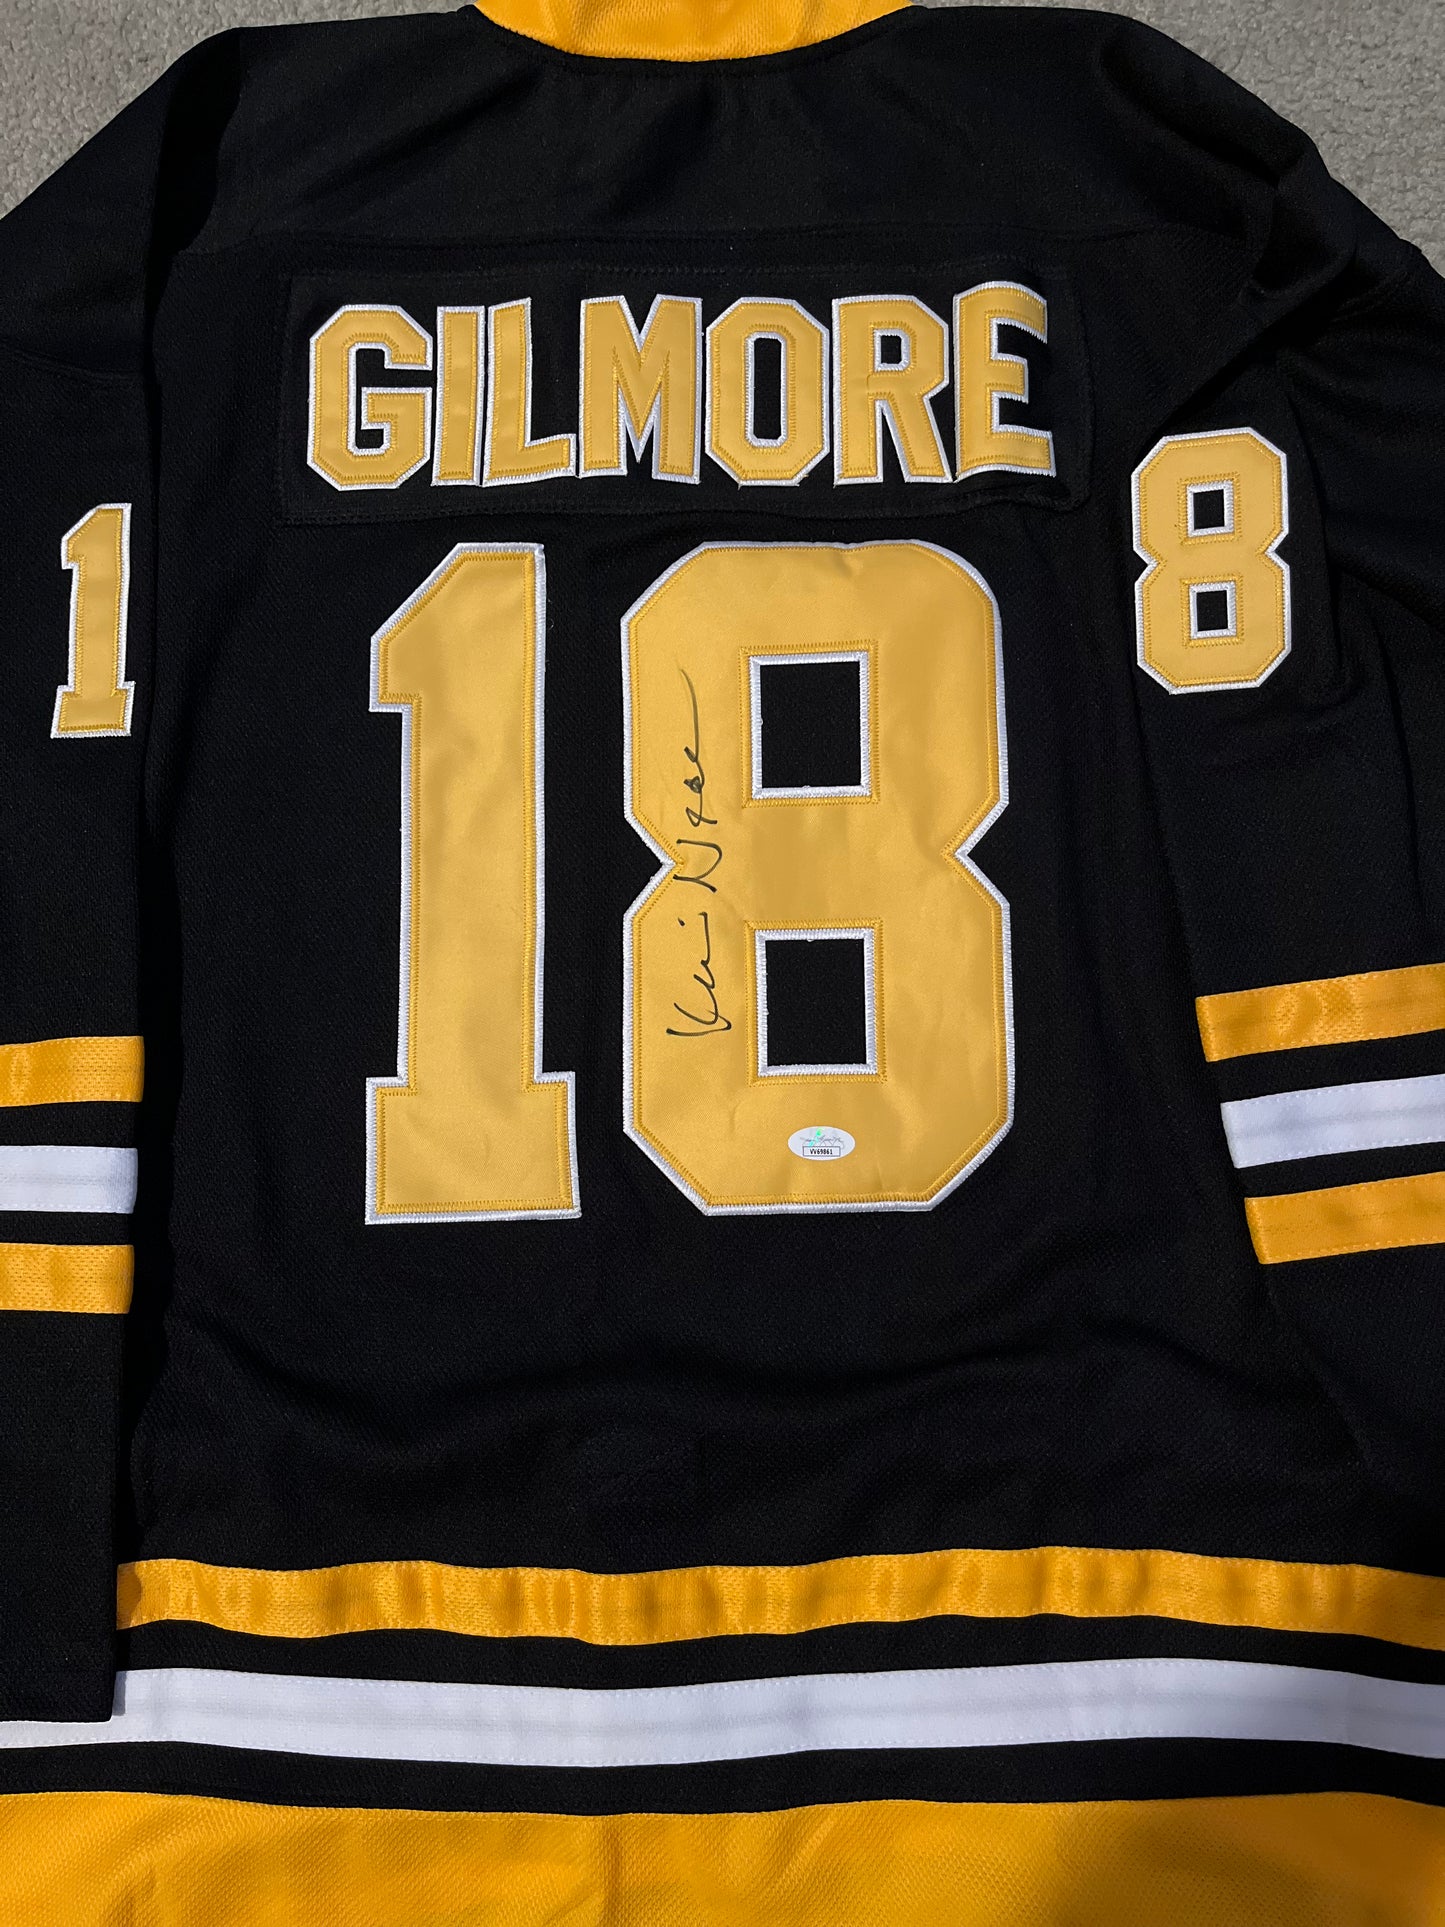 Happy Gilmore's Kevin Nealon signed "Gilmore" Bruins jersey